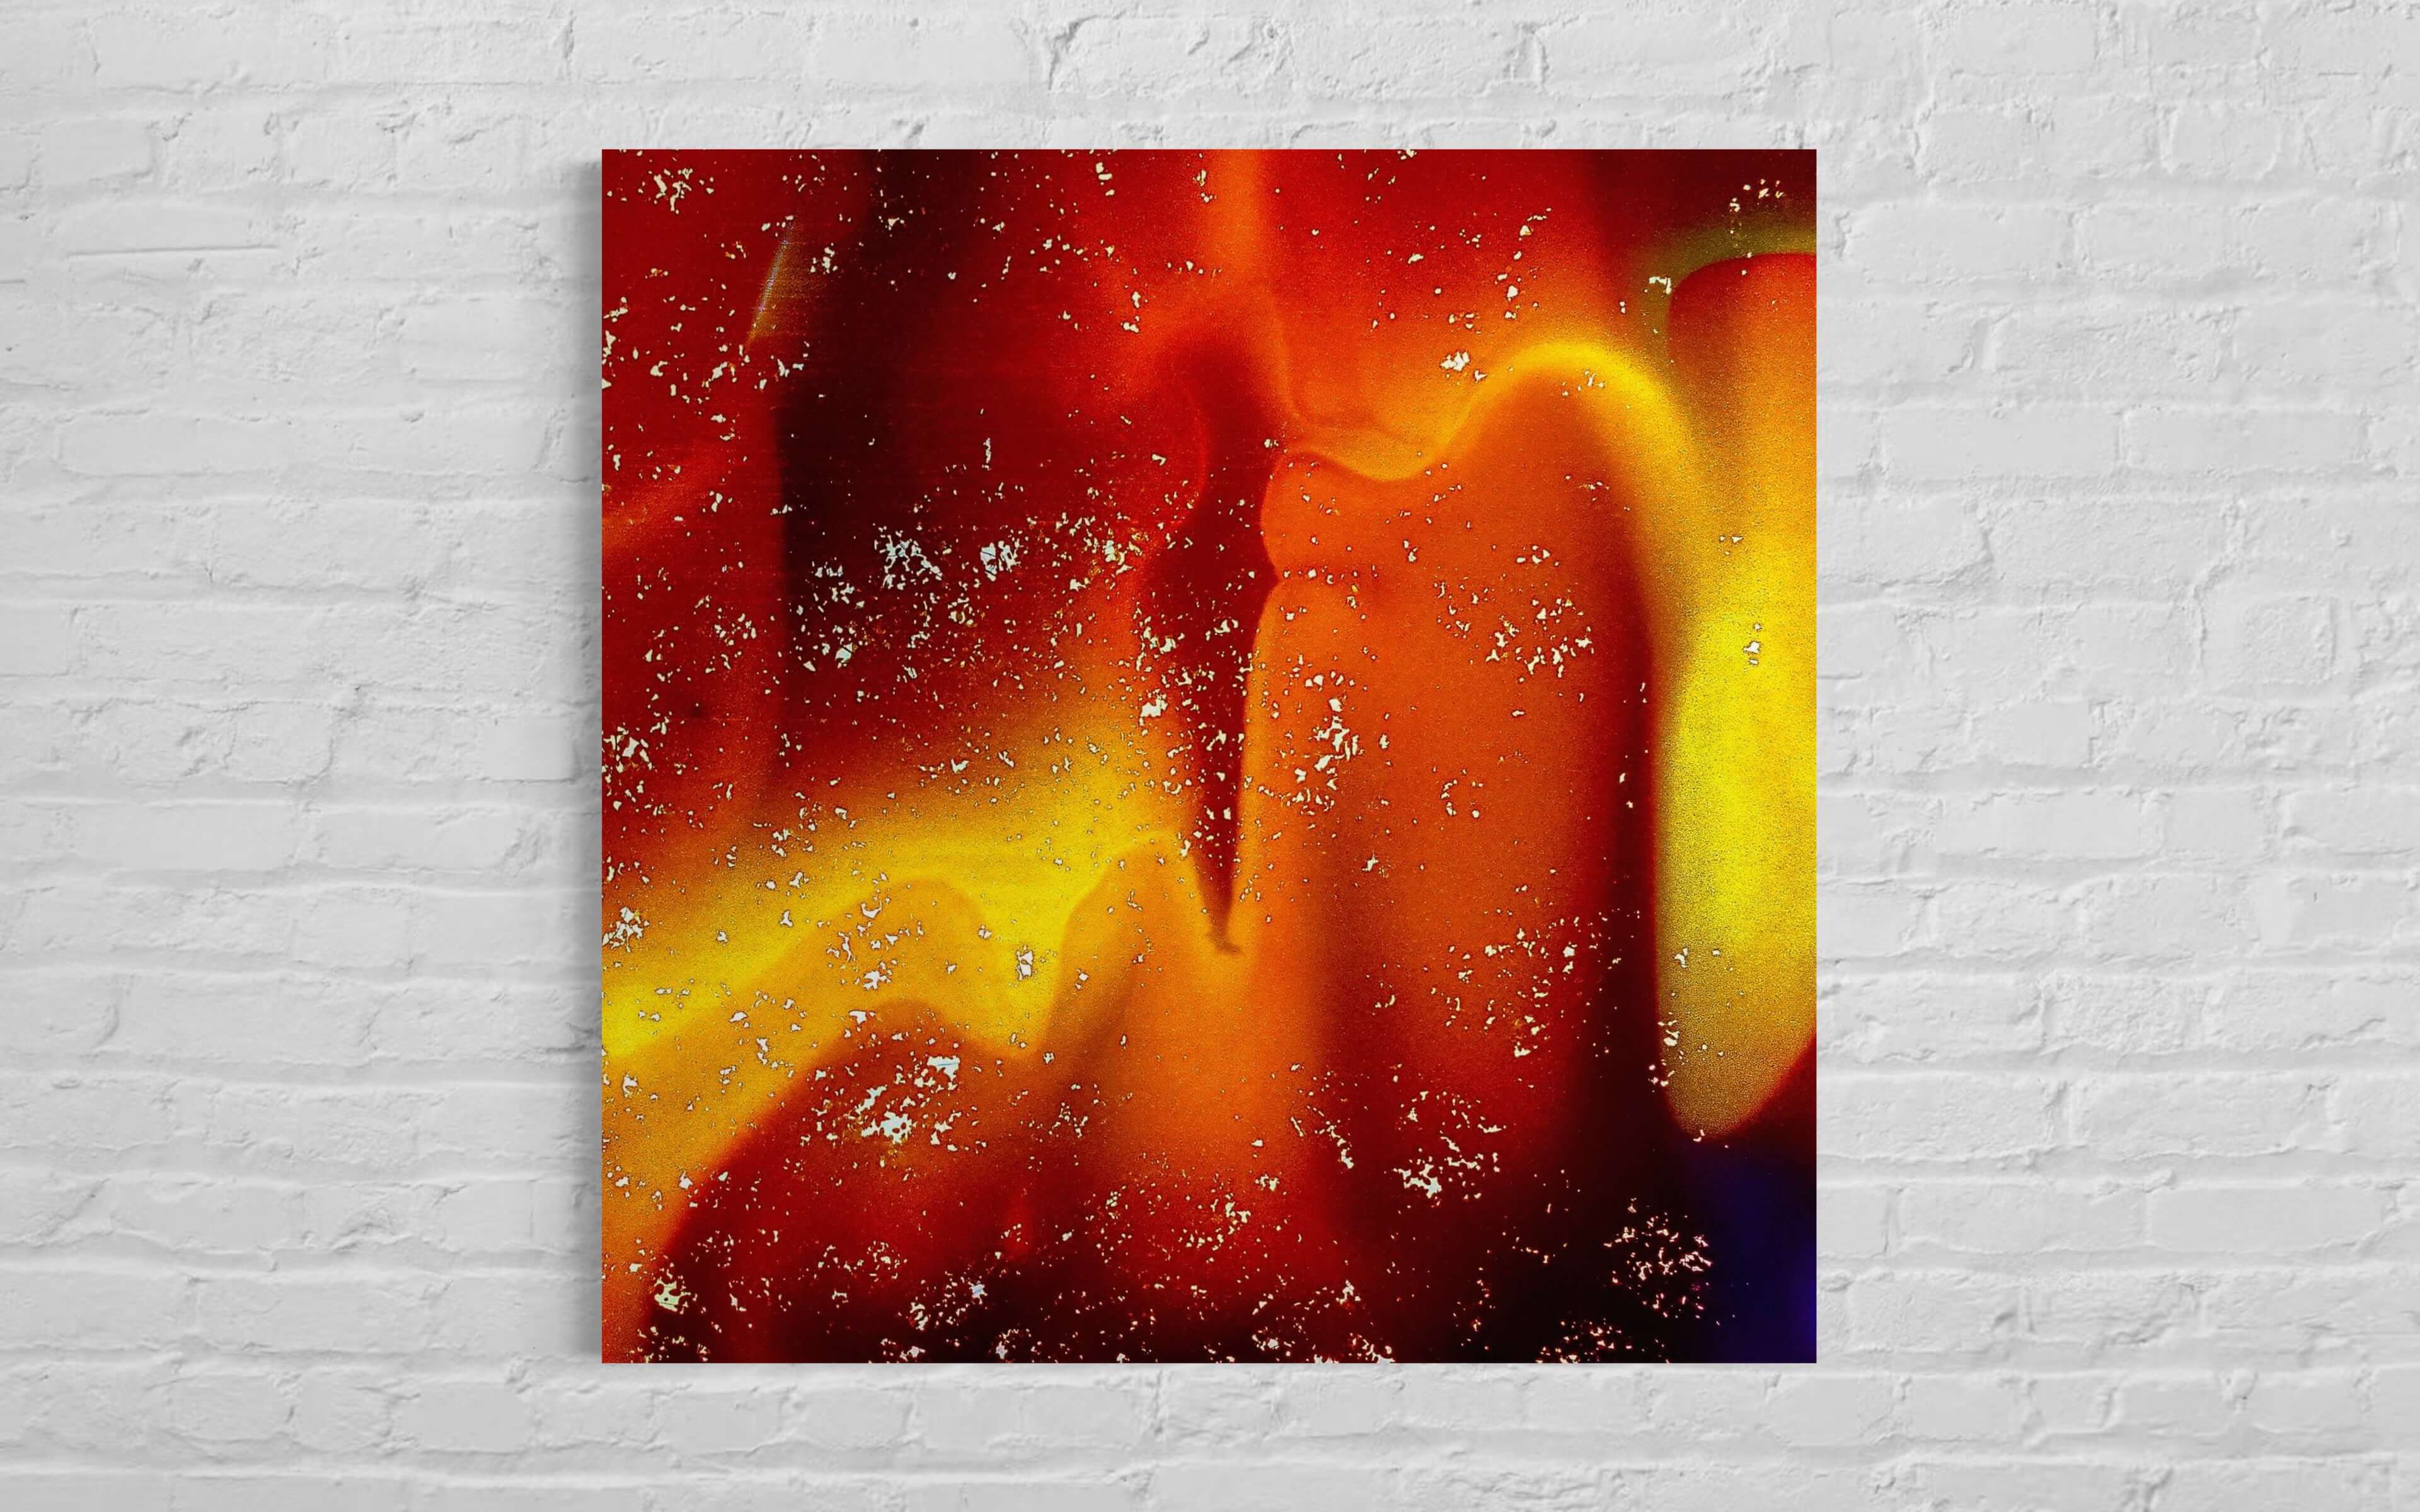 This image shows "Flaming," an artwork full of warm colours like red and yellow, mounted on a white brick wall. The colours blend together and have a fiery look, with little white specks scattered across, like embers in a fire. The artwork stands out against the wall and seems to bring a warm glow to the room.